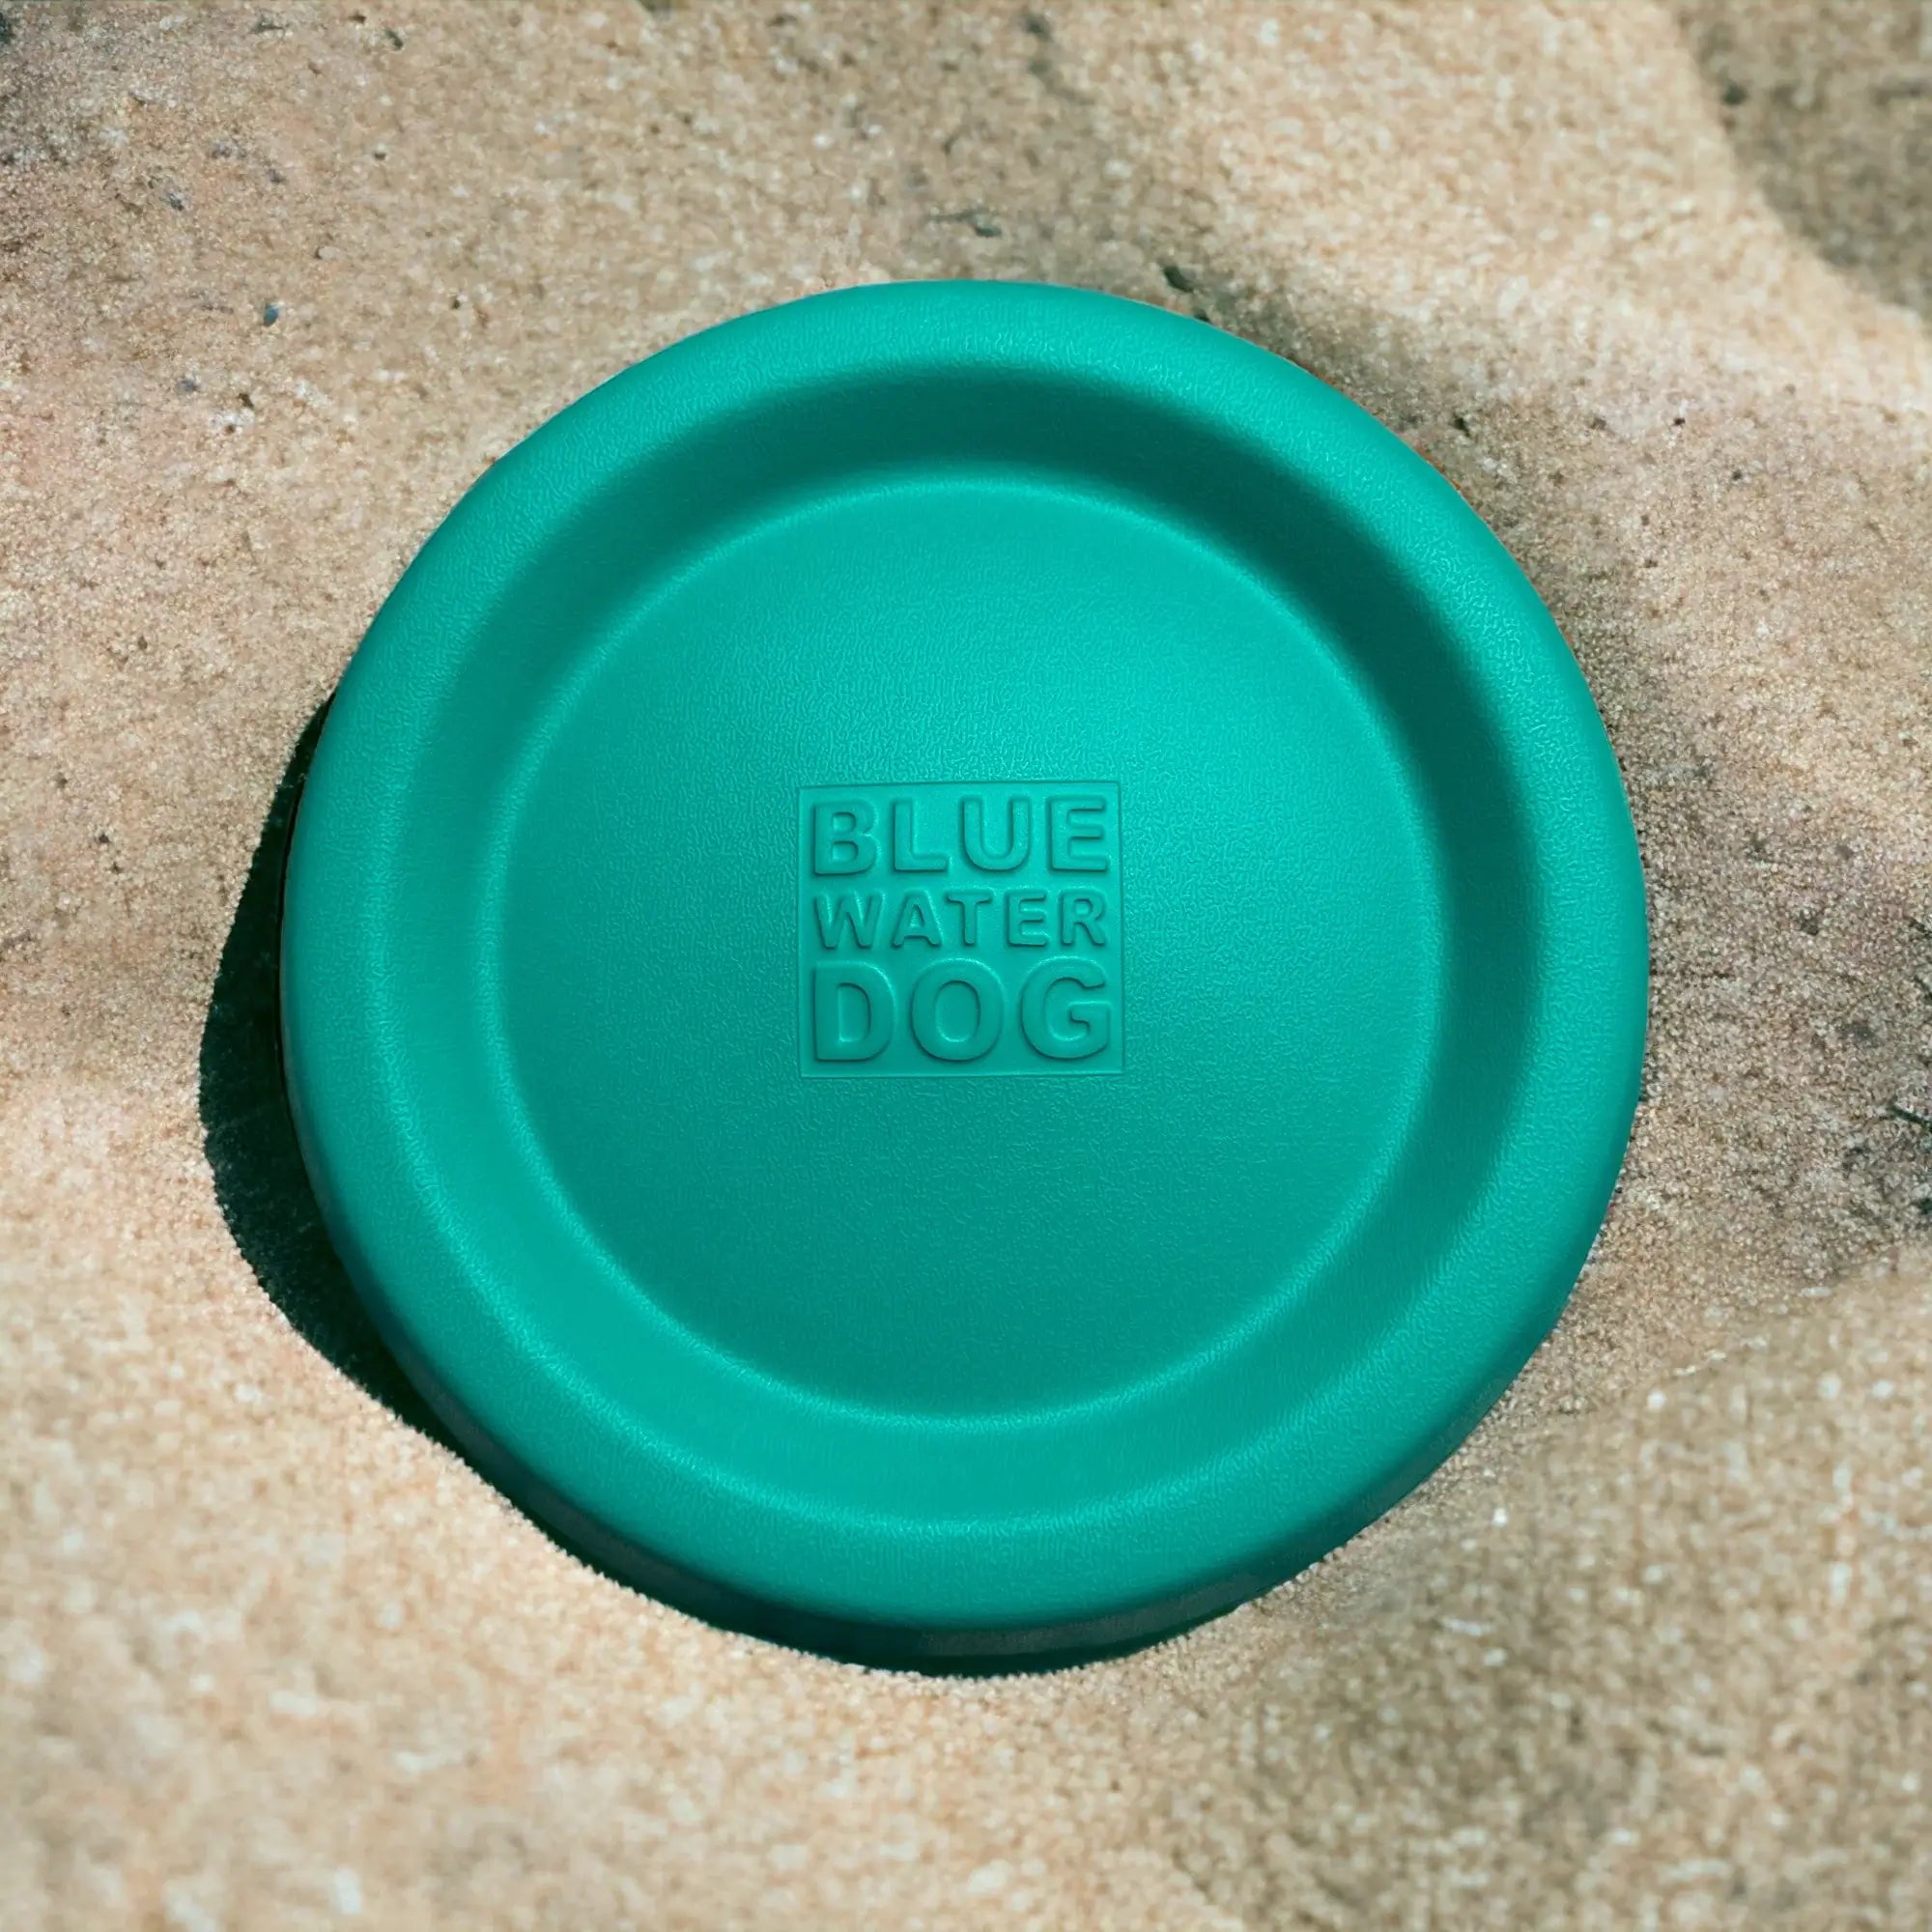 Teal dog frisbee laying in the sand.